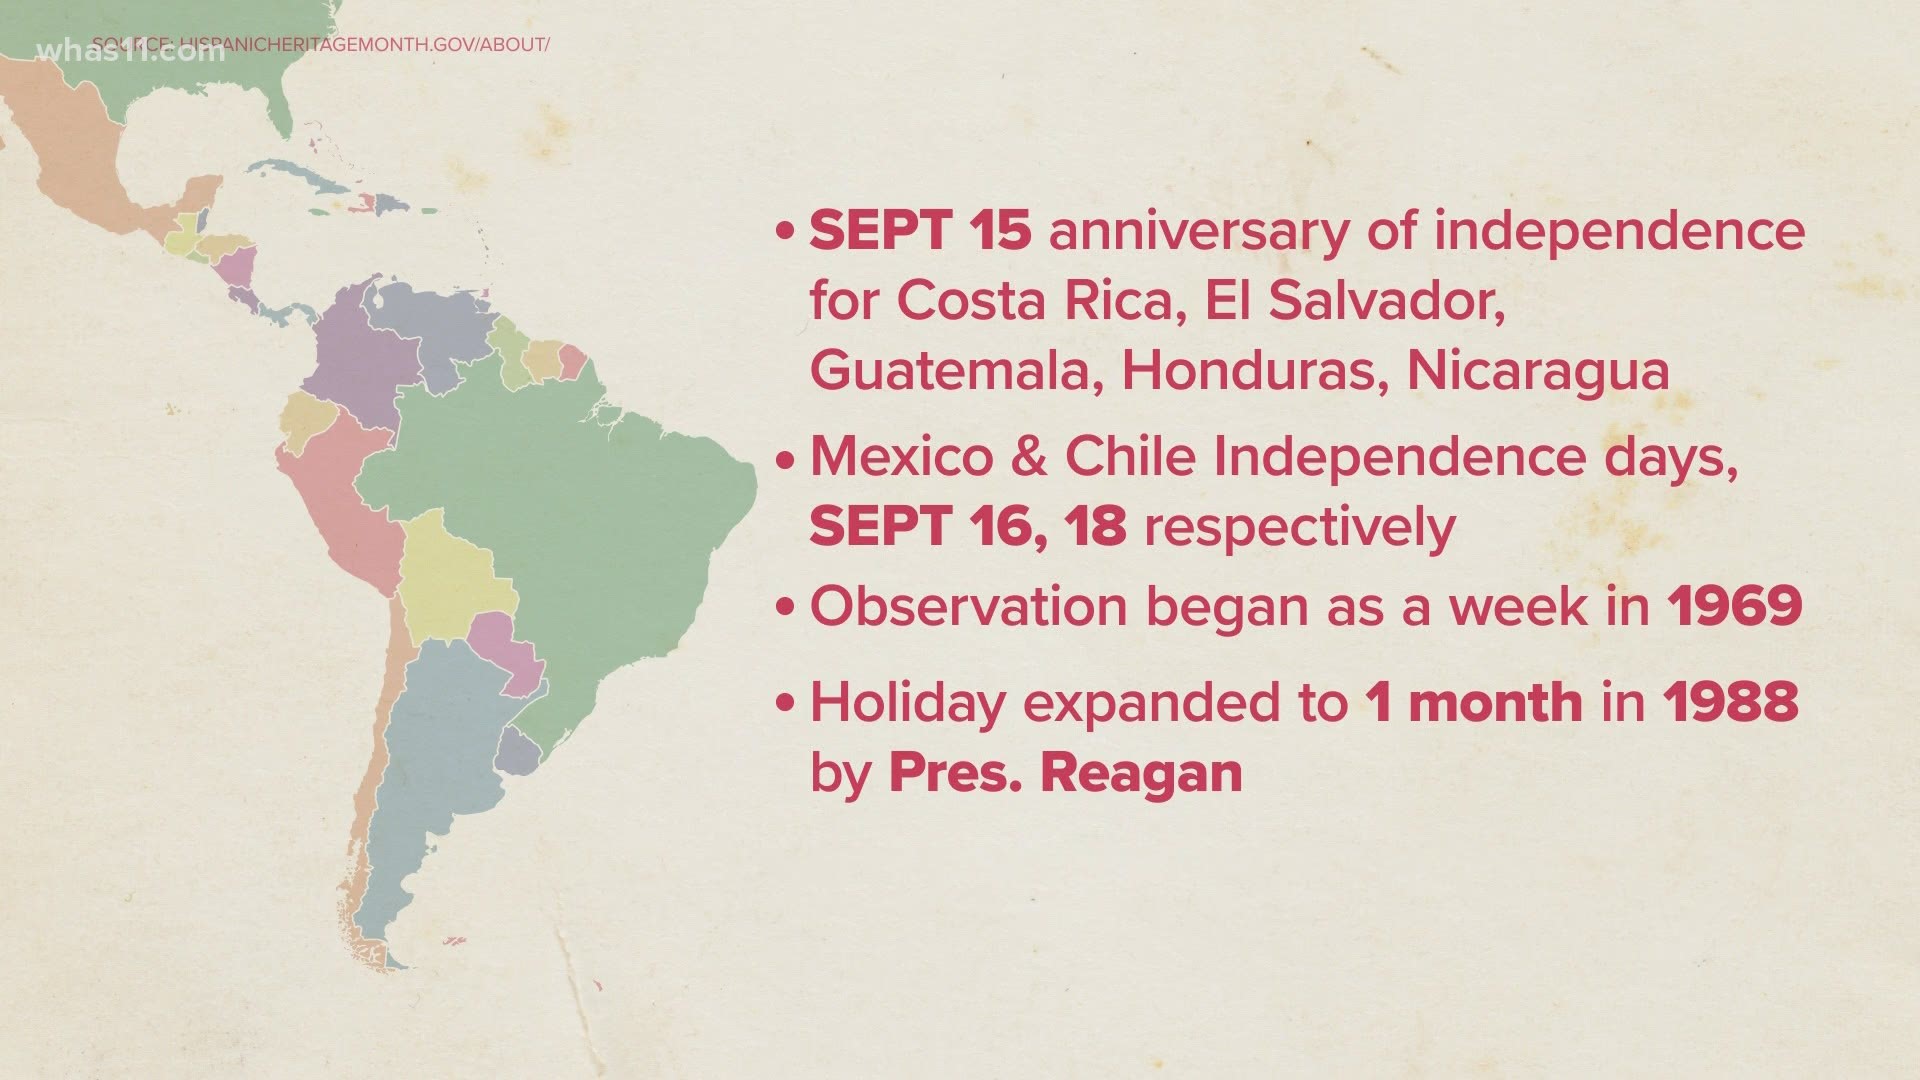 National Hispanic Heritage Month is from Sept. 15- Oct. 15